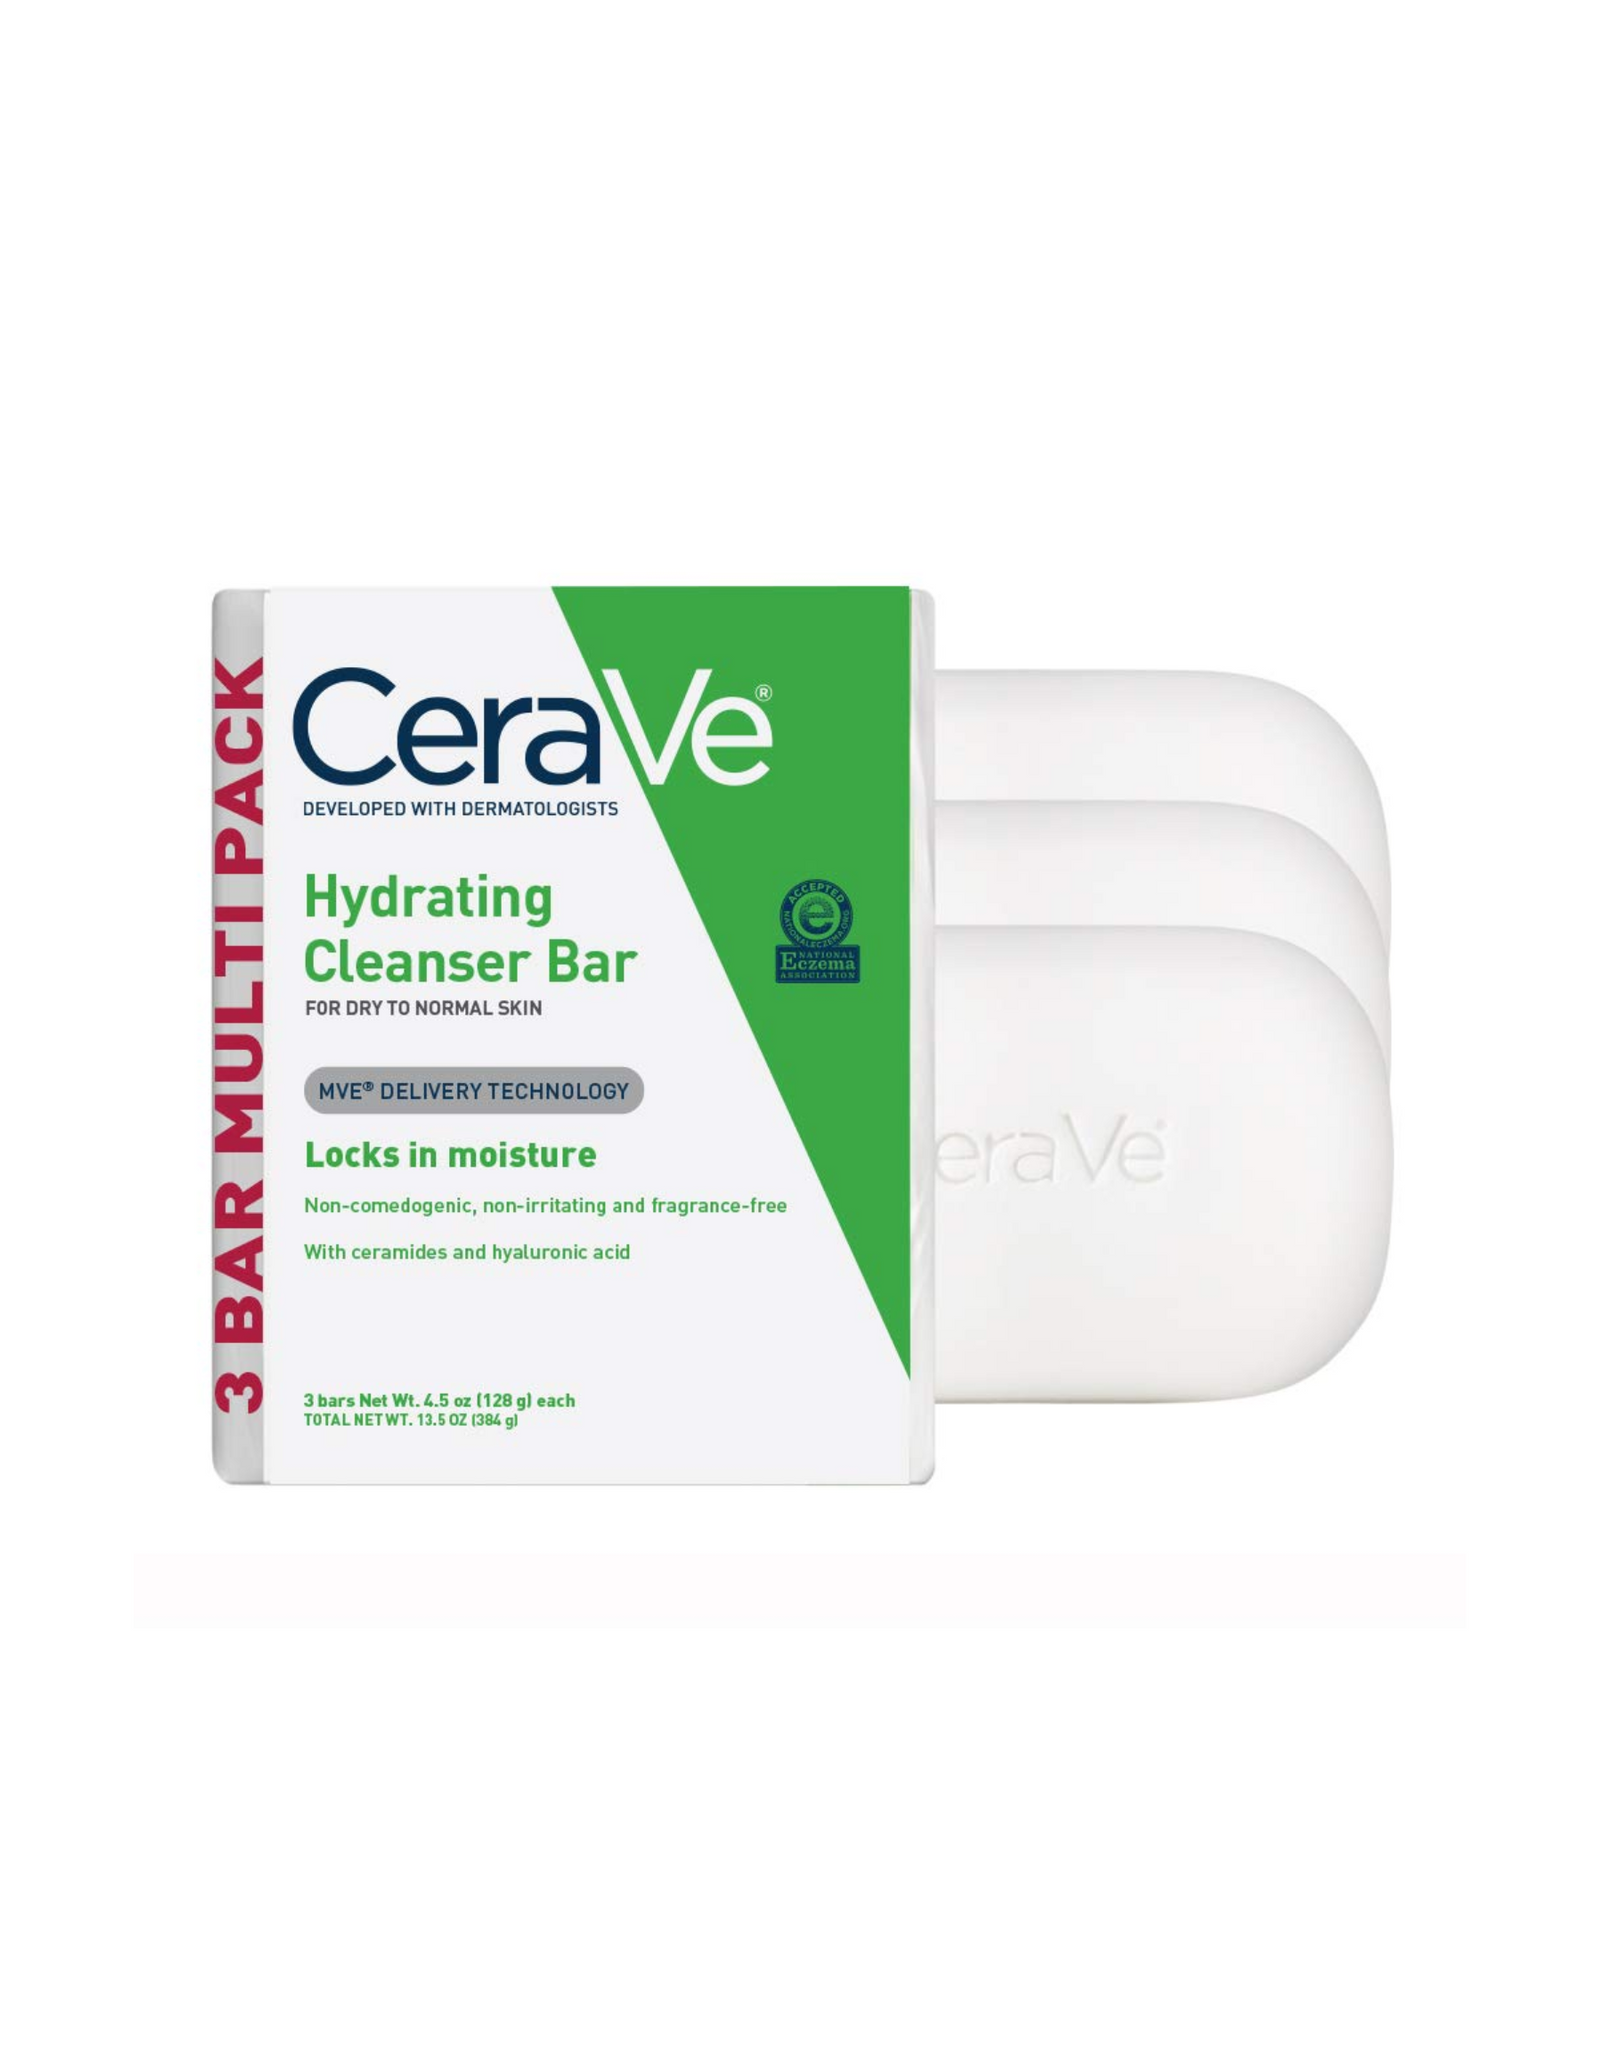 CeraVe Hydrating Cleanser Bar Soap-Free Body and Facial Cleanser with 5% Cerave Moisturizing Cream Fragrance-Free - 4.5 oz Each (Pack of 3)